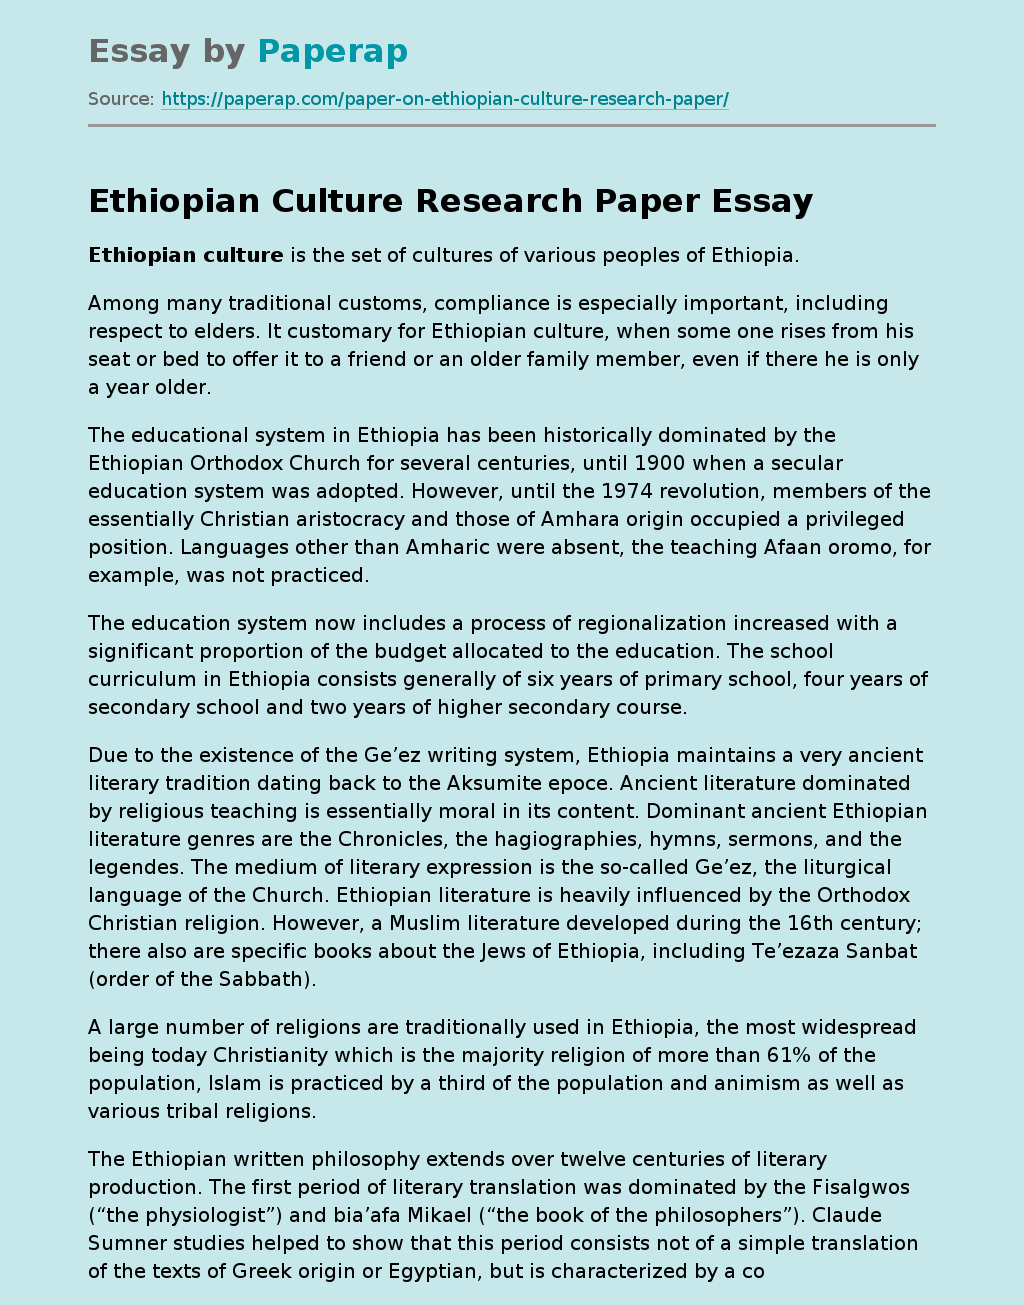 research proposal format in ethiopia